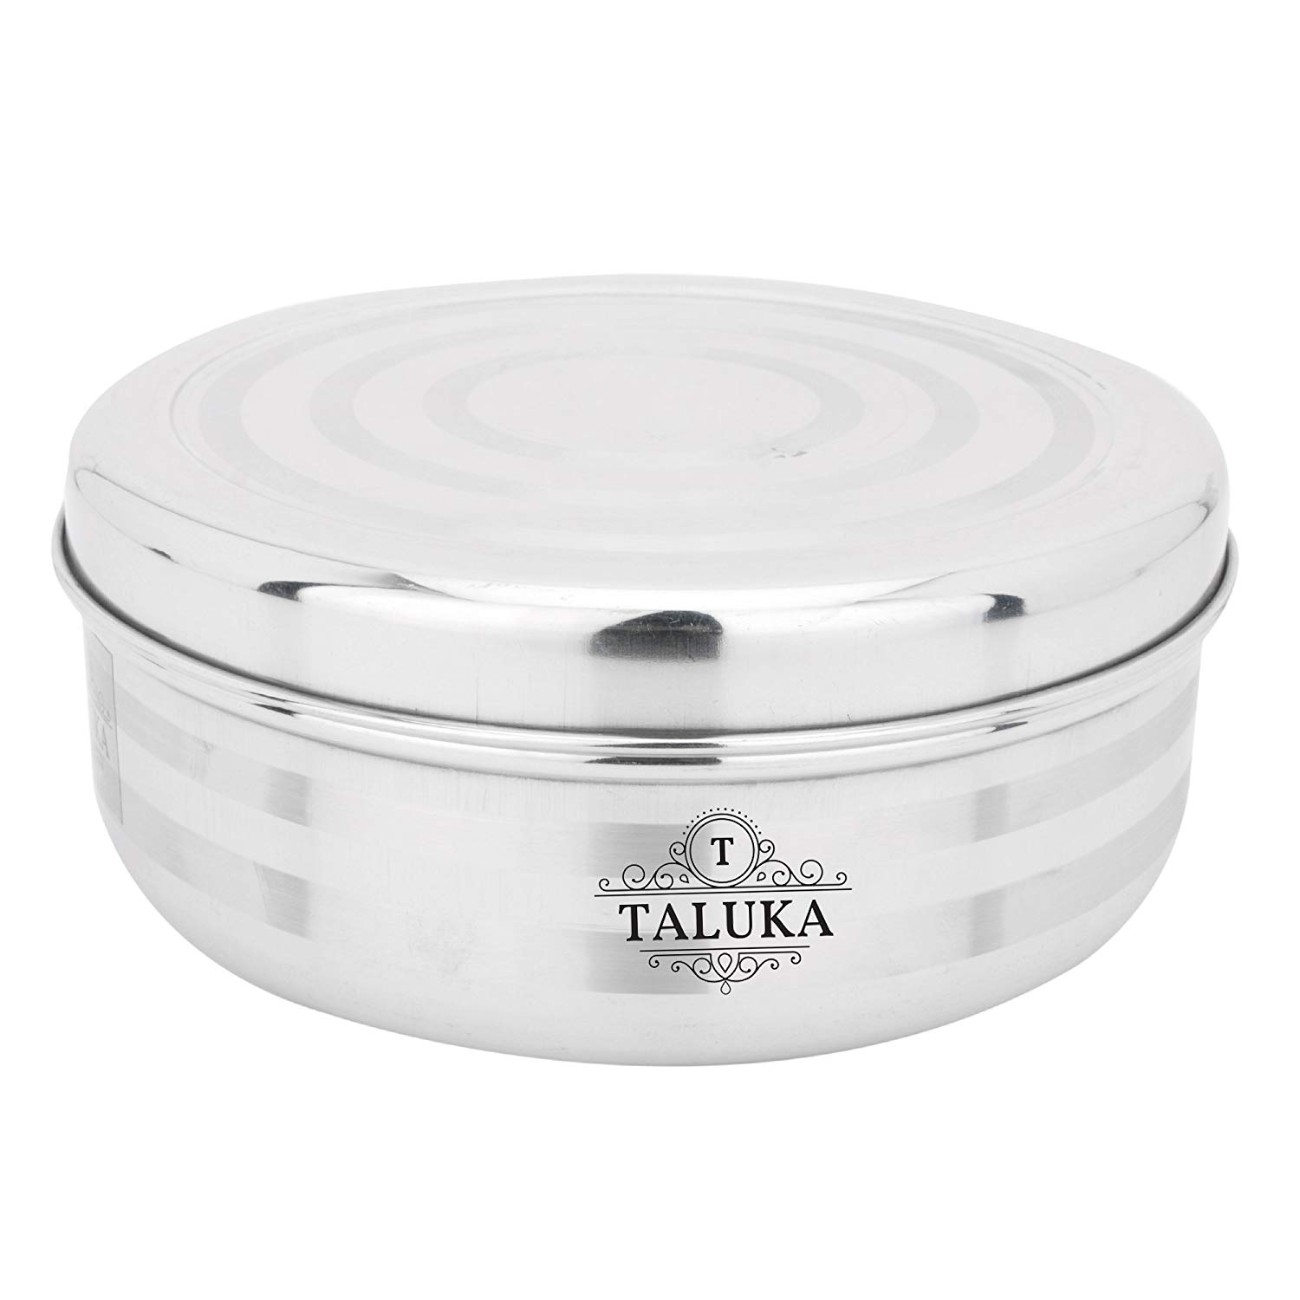 Stainless Steel Masala Box Spice Box Masala Dabba Container with 7 Compartments